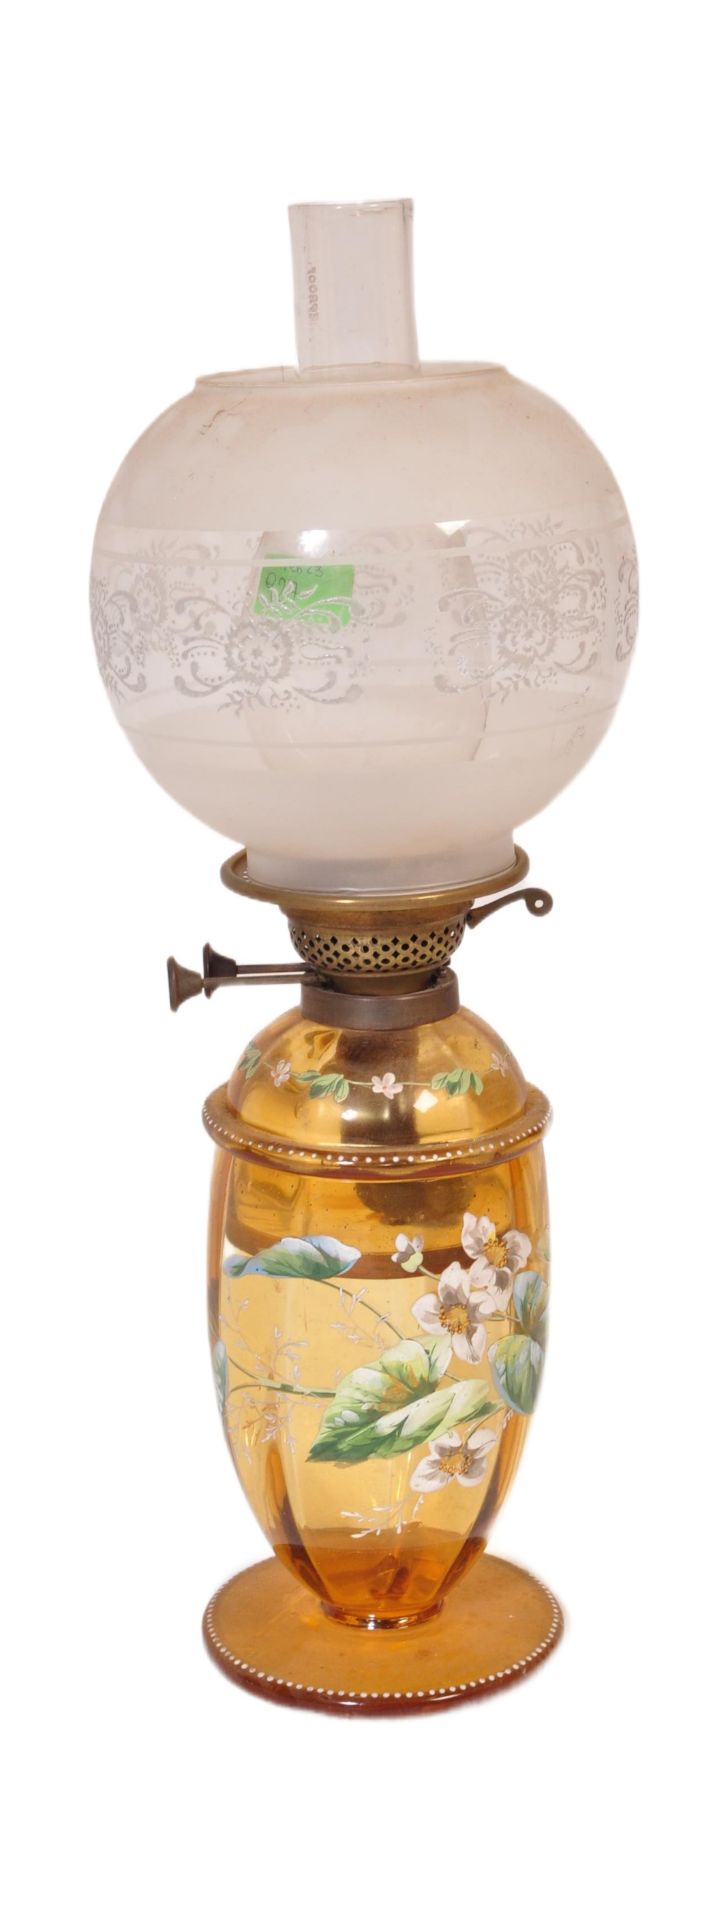 EARLY 20TH CENTURY GLASS ENAMELLED OIL LAMPS